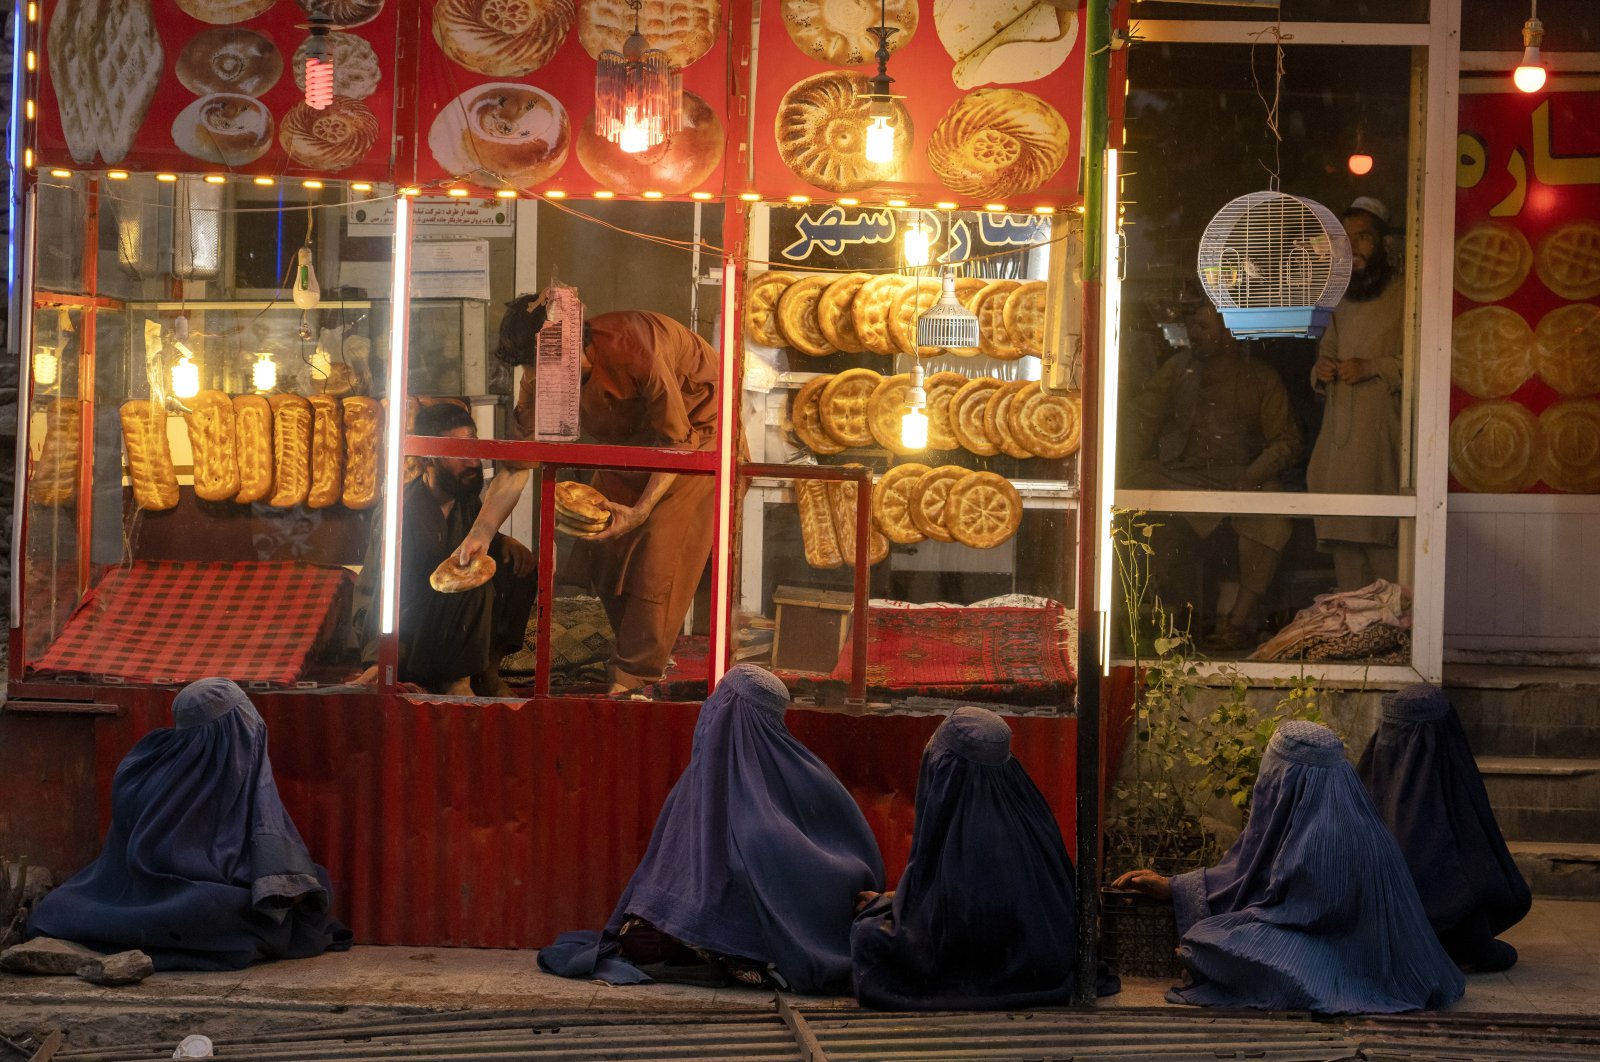 Begging women wait to receive alms in front of a bakery shop in Parwan province north of Kabul, Afghanistan, May 19, 2022. (AP Photo)